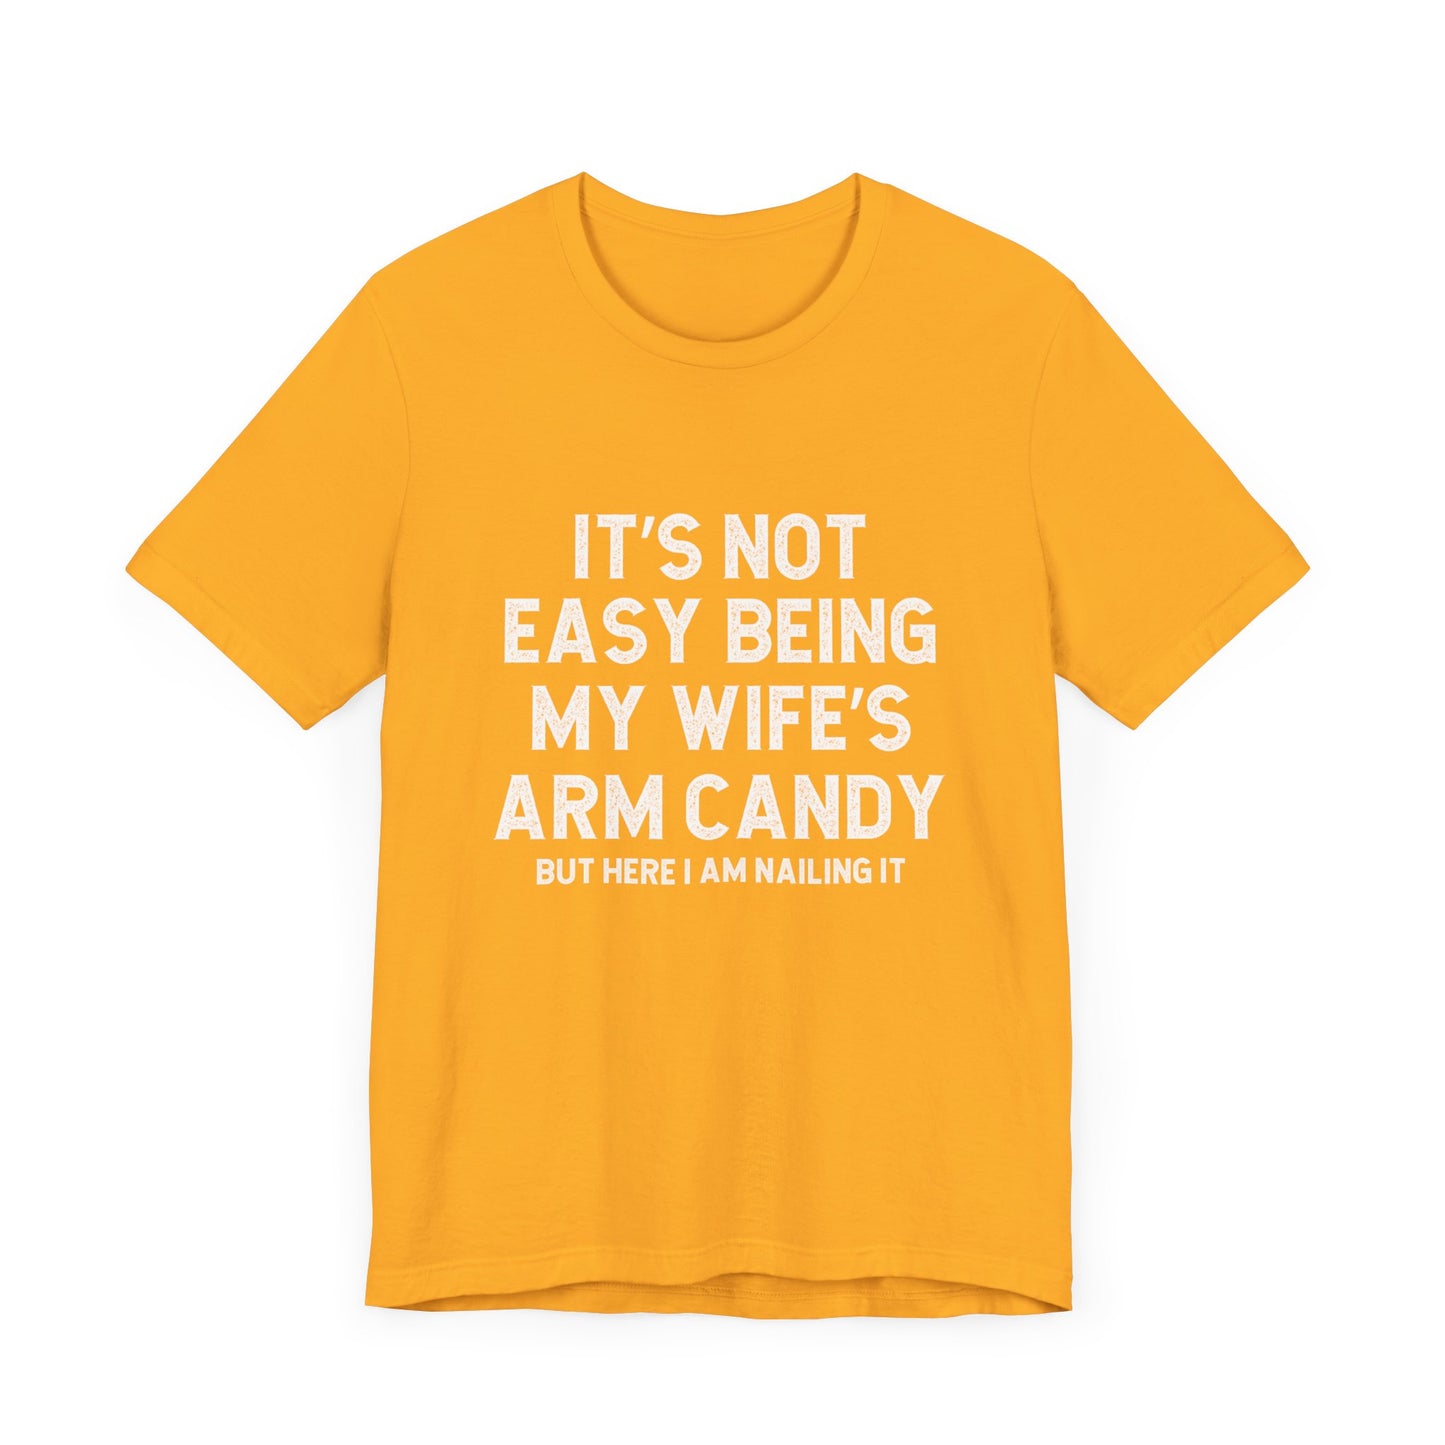 Wife's Arm Candy - Multi colors /sizes available - Jersey Short Sleeve Tee